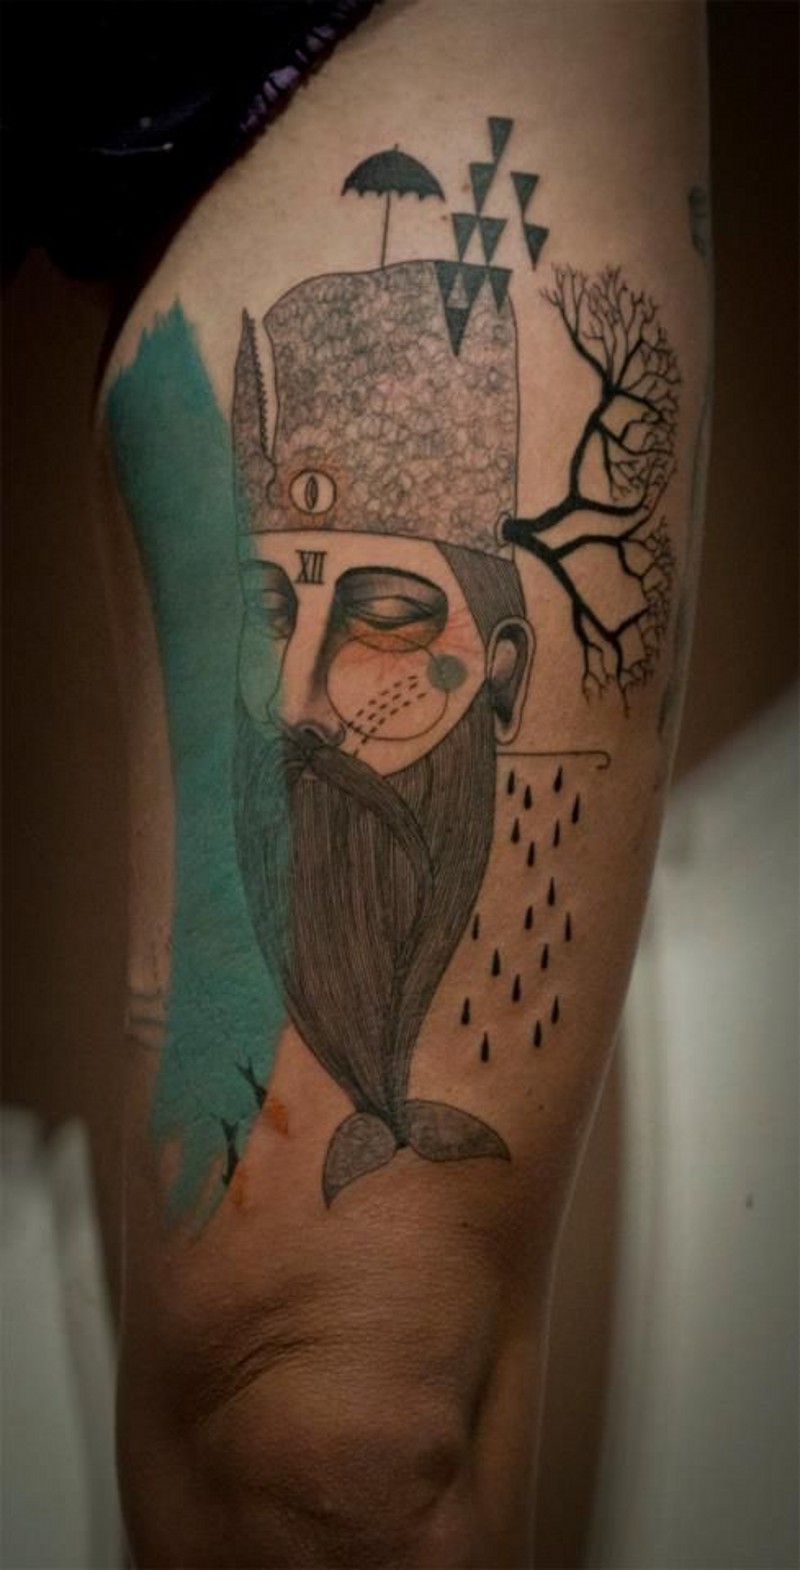 Stupid designed and colored unusual portrait tattoo on thigh